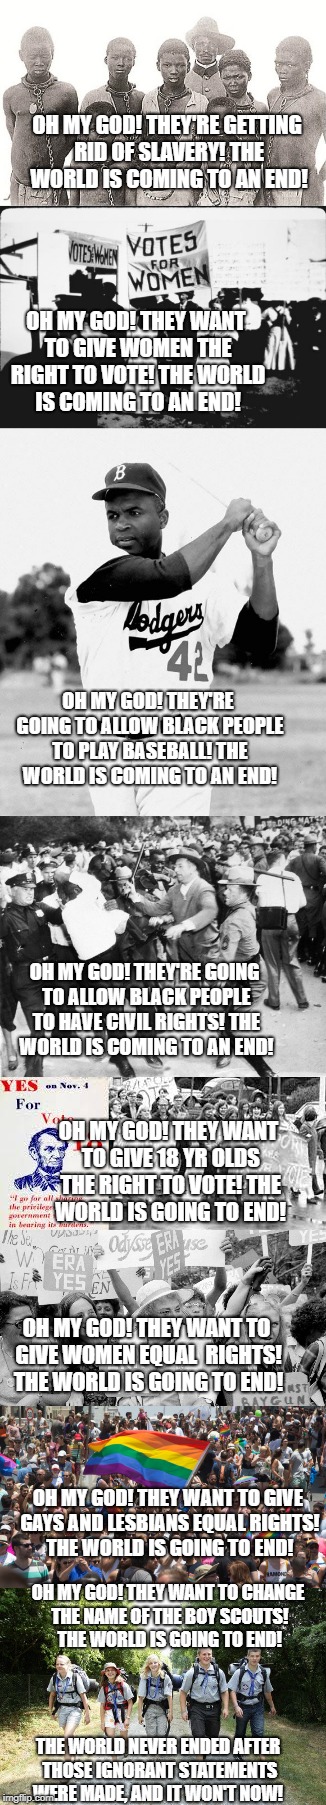 relax! | OH MY GOD! THEY'RE GETTING RID OF SLAVERY! THE WORLD IS COMING TO AN END! OH MY GOD! THEY WANT TO GIVE WOMEN THE RIGHT TO VOTE! THE WORLD IS COMING TO AN END! OH MY GOD! THEY'RE GOING TO ALLOW BLACK PEOPLE TO PLAY BASEBALL! THE WORLD IS COMING TO AN END! OH MY GOD! THEY'RE GOING TO ALLOW BLACK PEOPLE TO HAVE CIVIL RIGHTS! THE WORLD IS COMING TO AN END! OH MY GOD! THEY WANT TO GIVE 18 YR OLDS THE RIGHT TO VOTE! THE WORLD IS GOING TO END! OH MY GOD! THEY WANT TO GIVE WOMEN EQUAL  RIGHTS! THE WORLD IS GOING TO END! OH MY GOD! THEY WANT TO GIVE GAYS AND LESBIANS EQUAL RIGHTS! THE WORLD IS GOING TO END! OH MY GOD! THEY WANT TO CHANGE THE NAME OF THE BOY SCOUTS! THE WORLD IS GOING TO END! THE WORLD NEVER ENDED AFTER THOSE IGNORANT STATEMENTS WERE MADE, AND IT WON'T NOW! | image tagged in ignorance | made w/ Imgflip meme maker